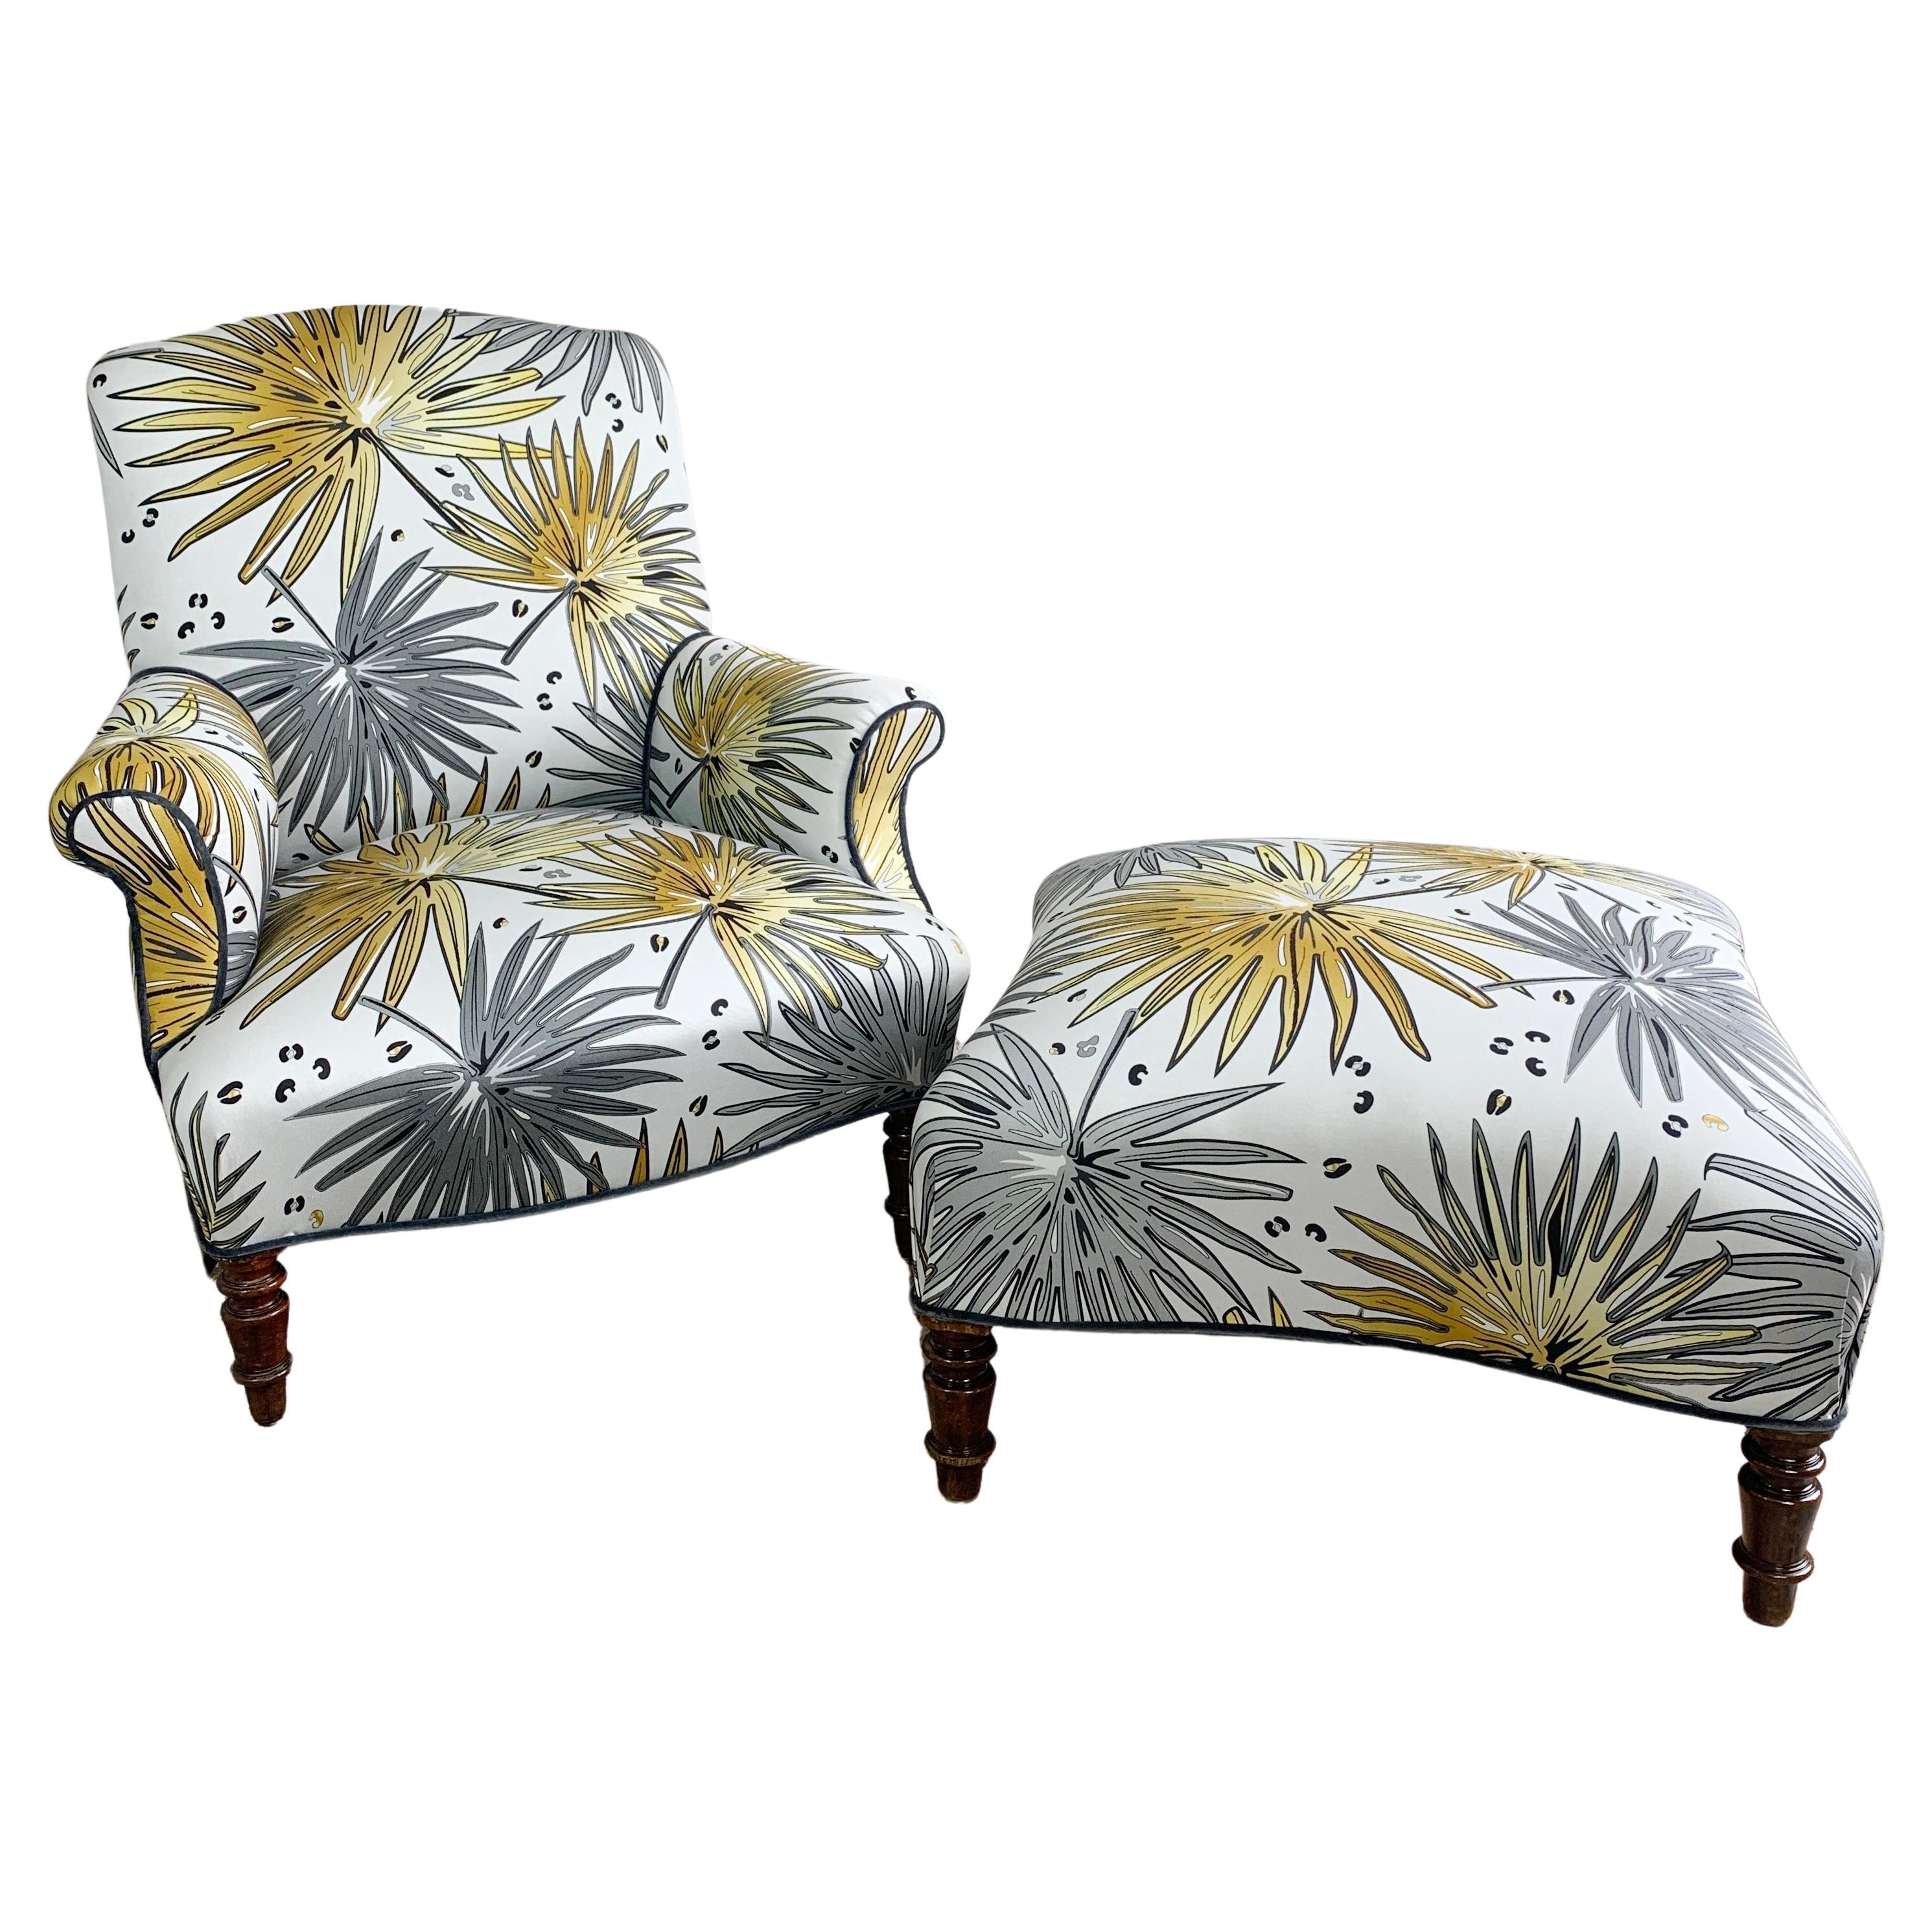 19th C French Armchair and Footstool in 'Fan Palm’ Fabric